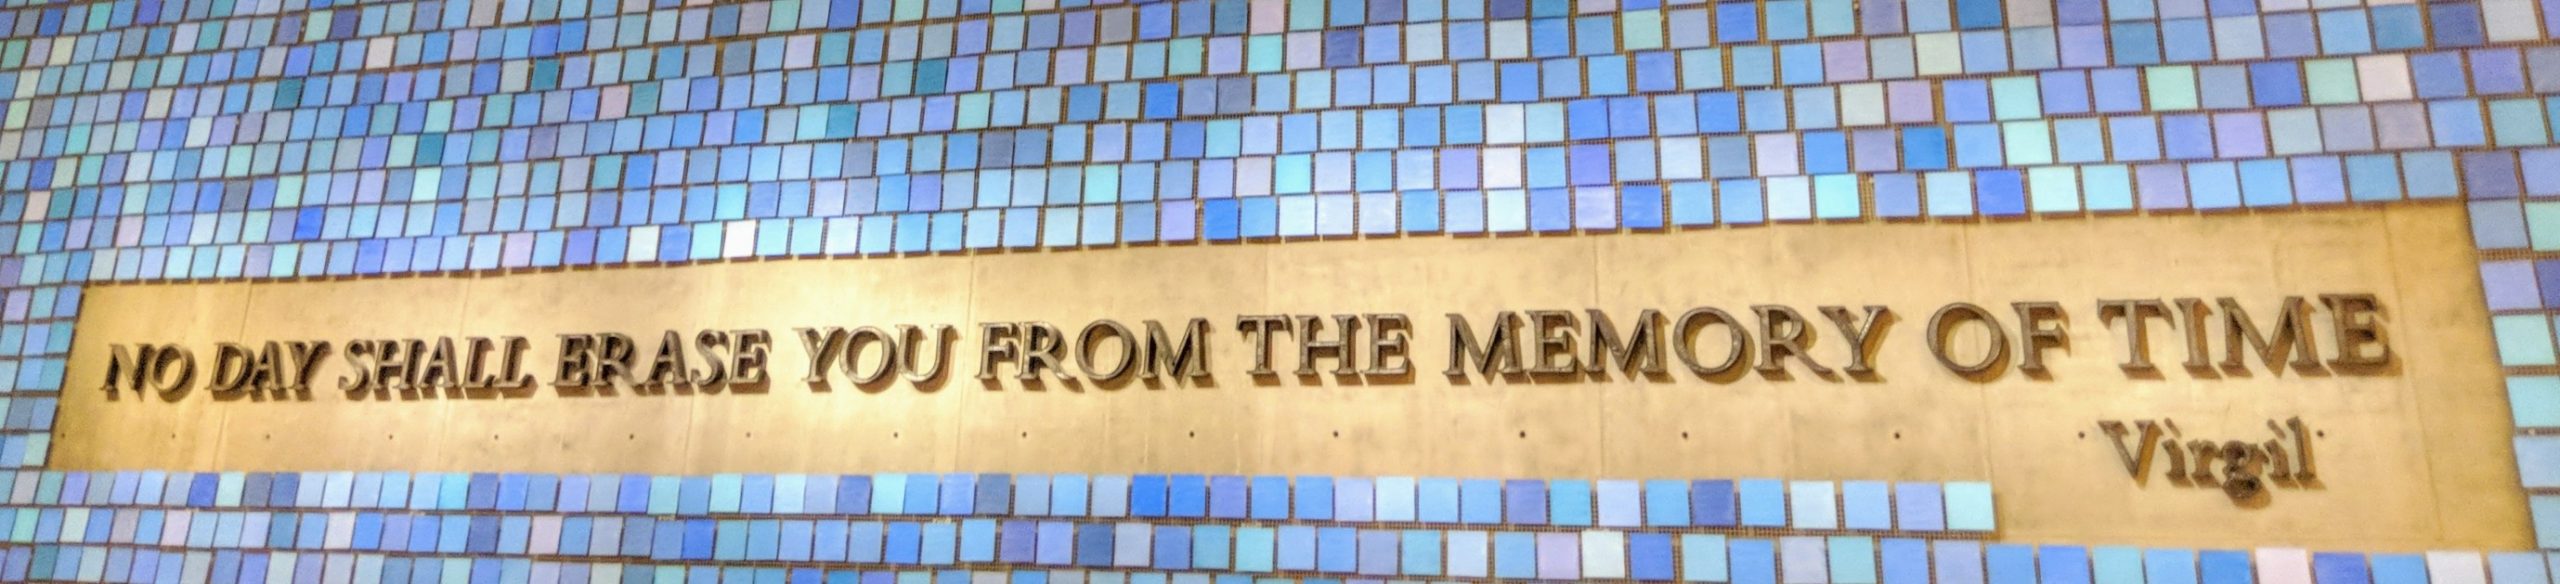 Do you want to visit the 9/11 Memorial Museum with kids? Find out how I could have better prepared and ideas on how to know if your child is ready. #newyorkcity #911museum #familytravel